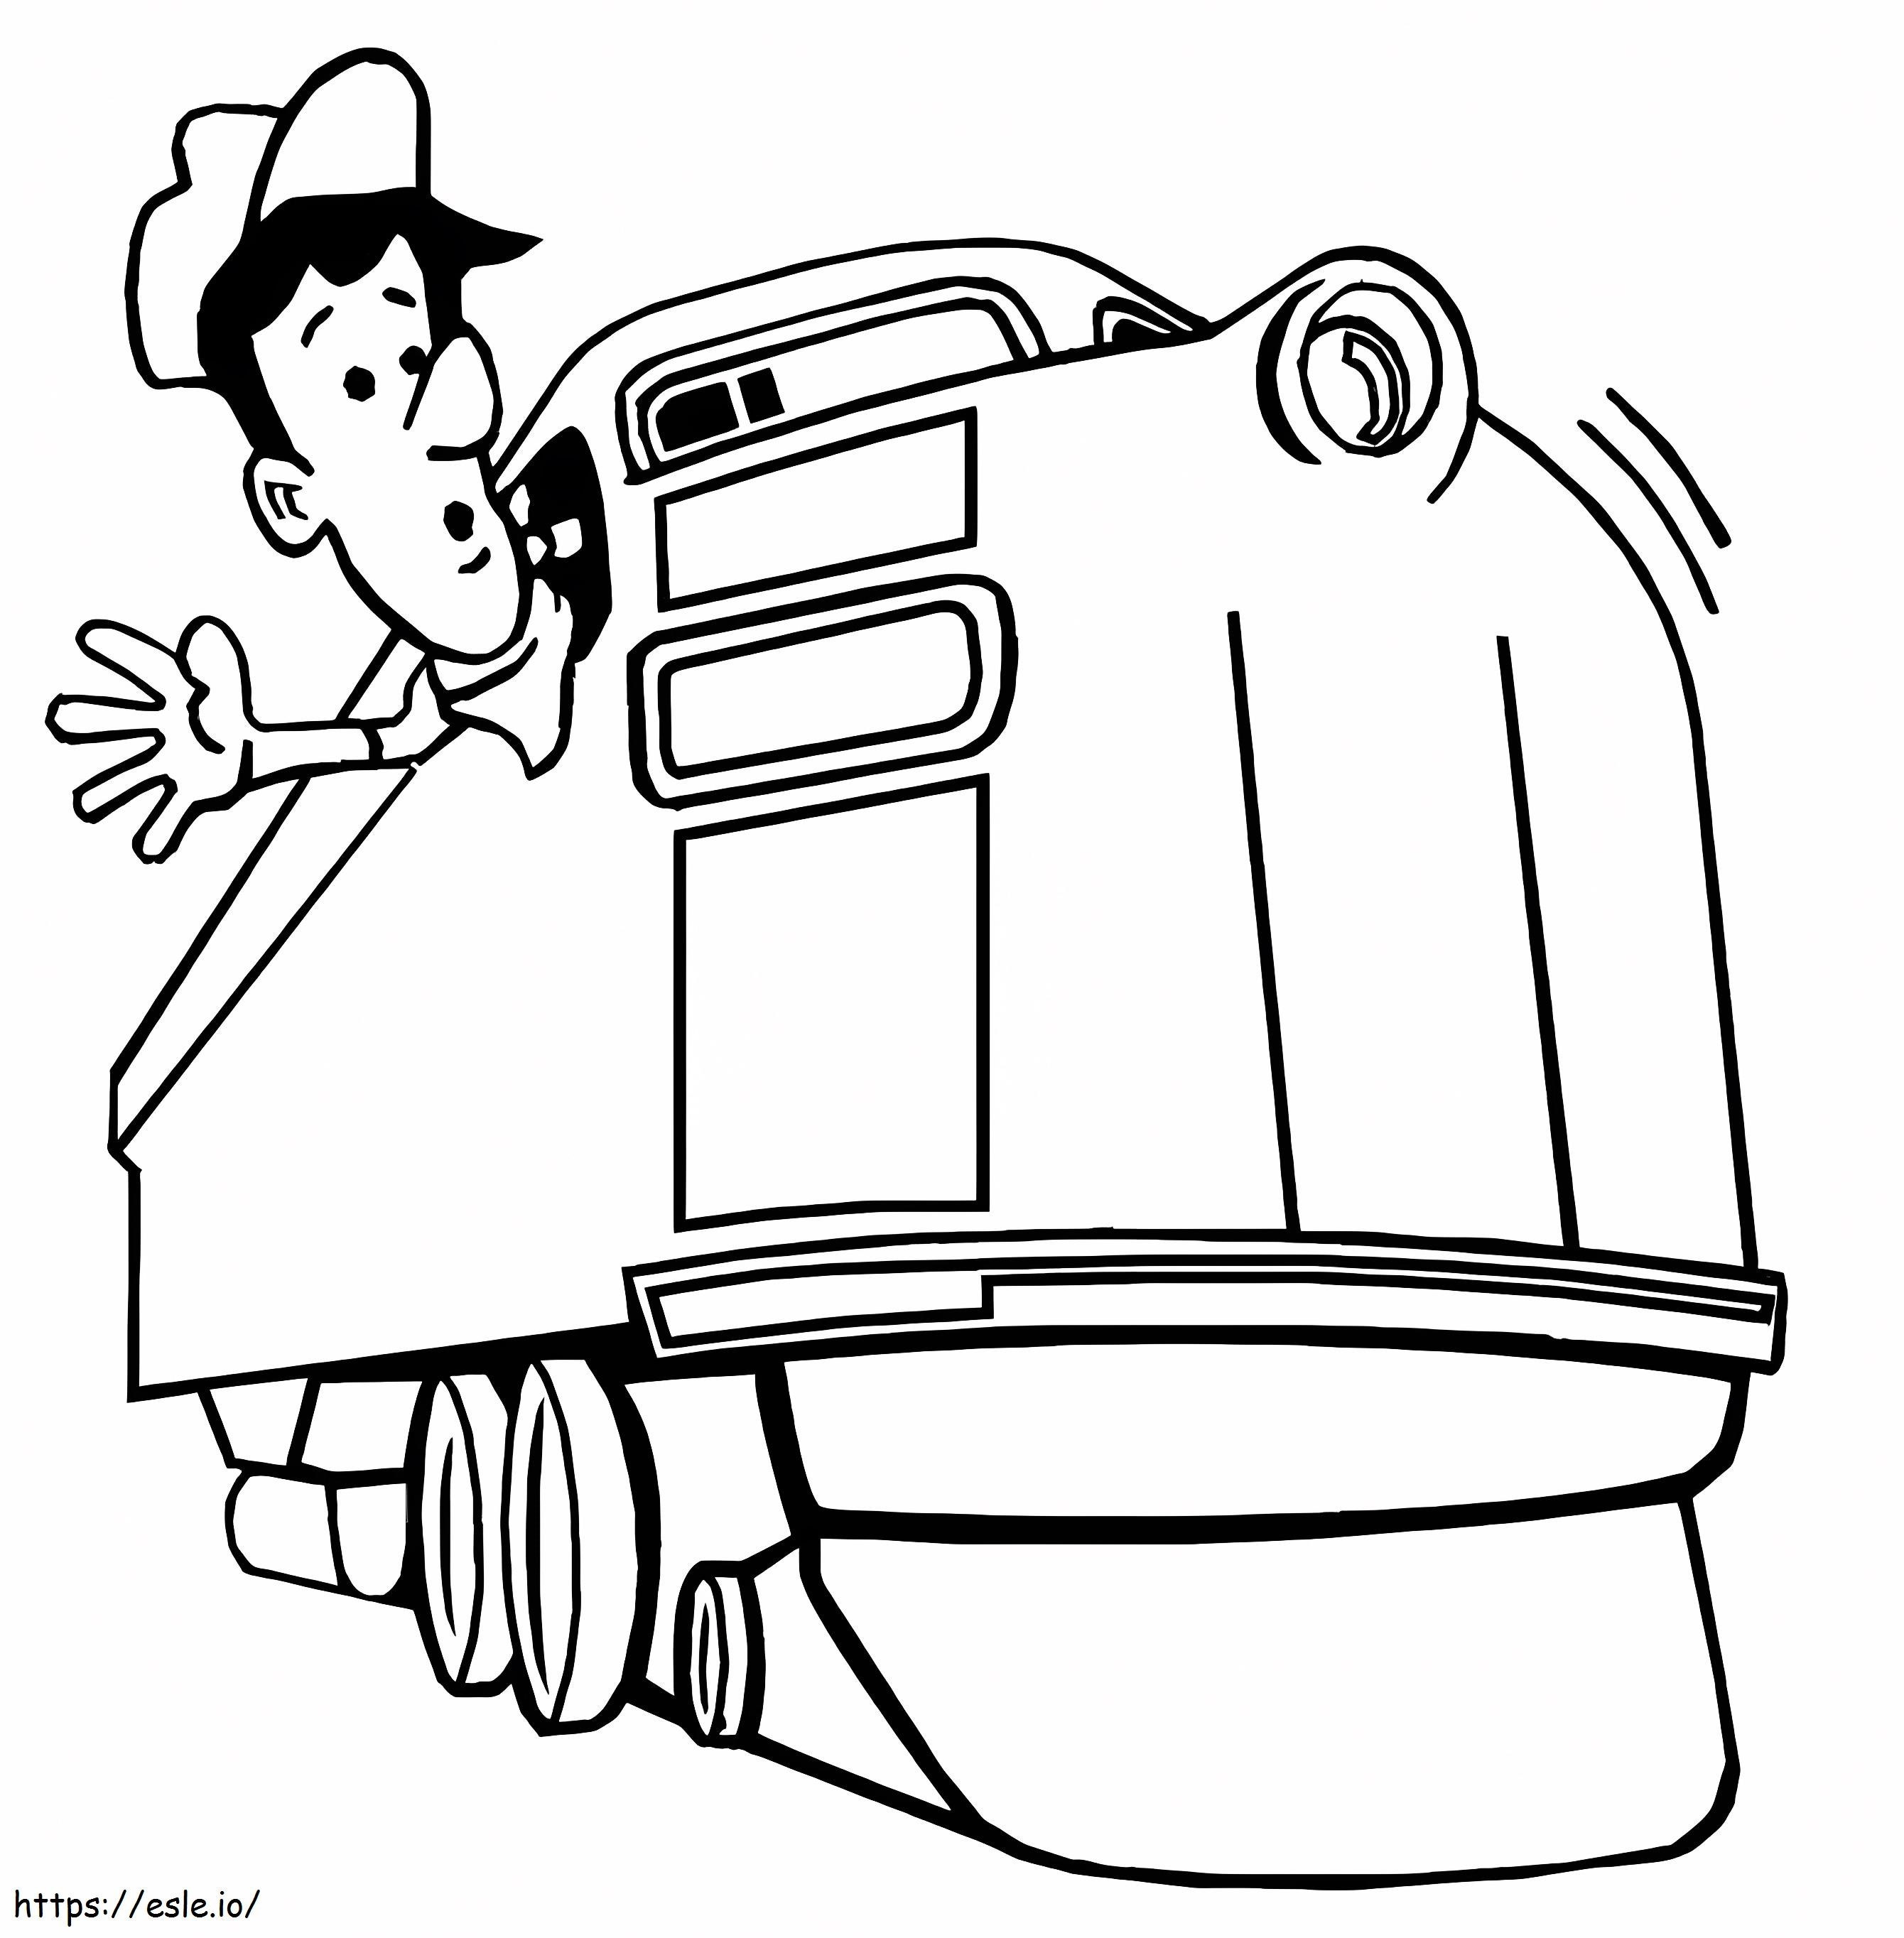 Train 3 coloring page